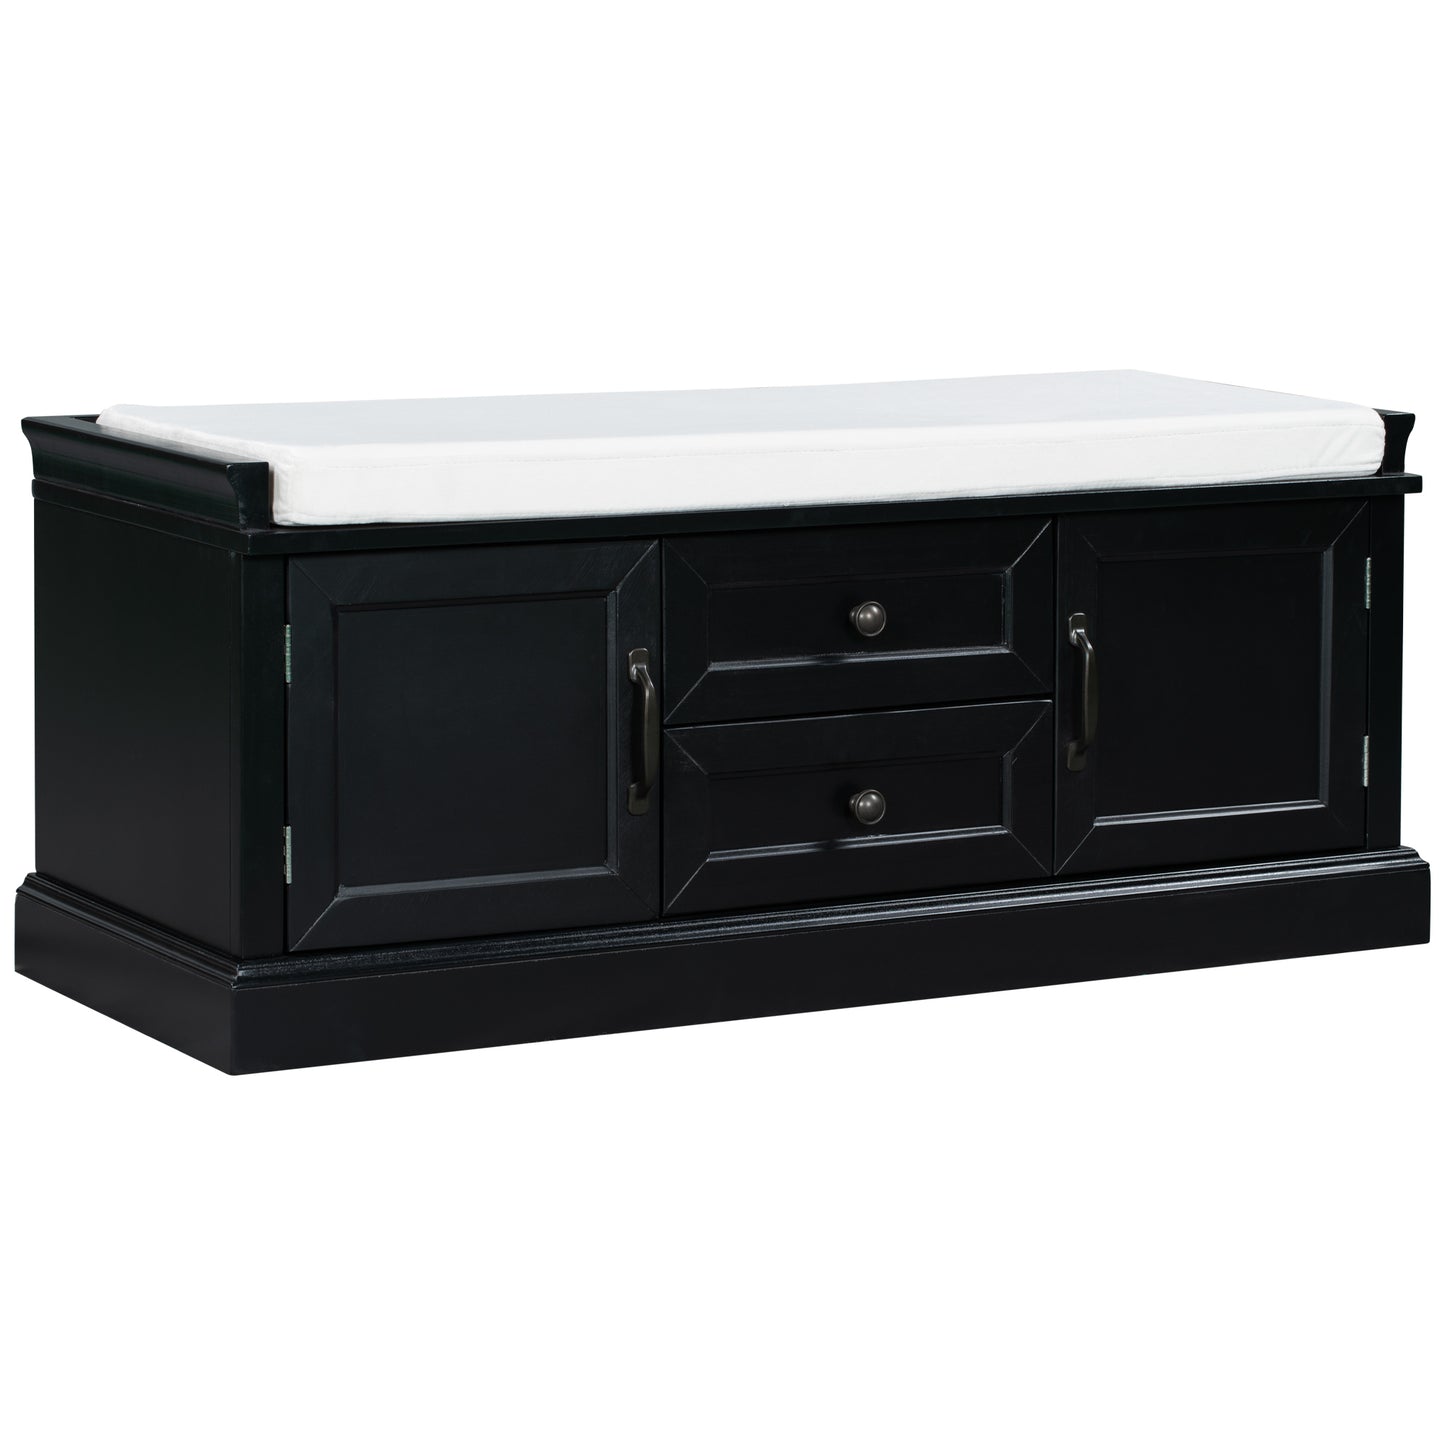 TREXM Storage Bench with 2 Drawers and 2 Cabinets - Black